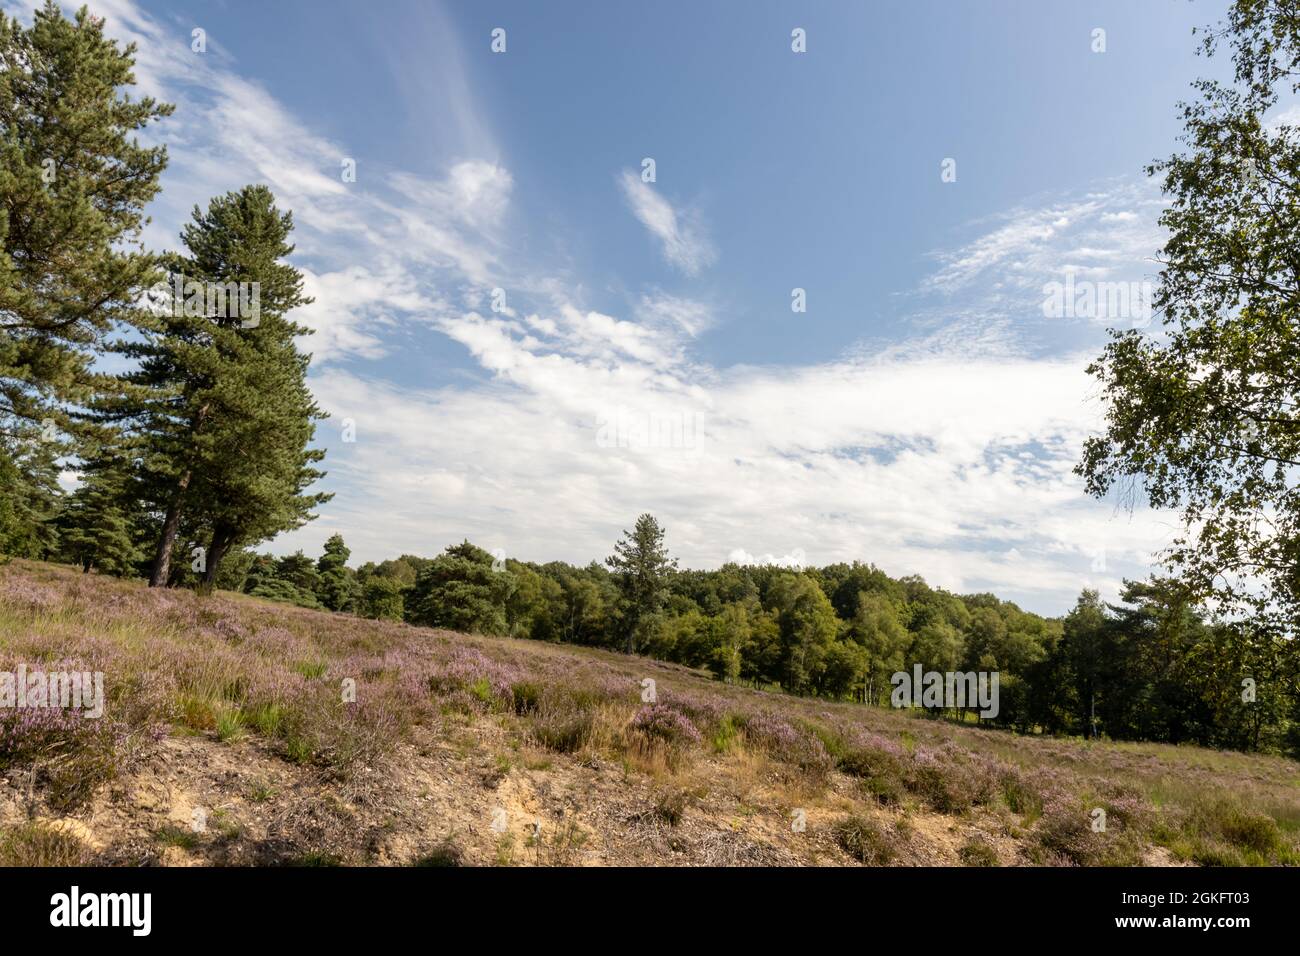 Heath and pine landscape in The Netherlands Stock Photo